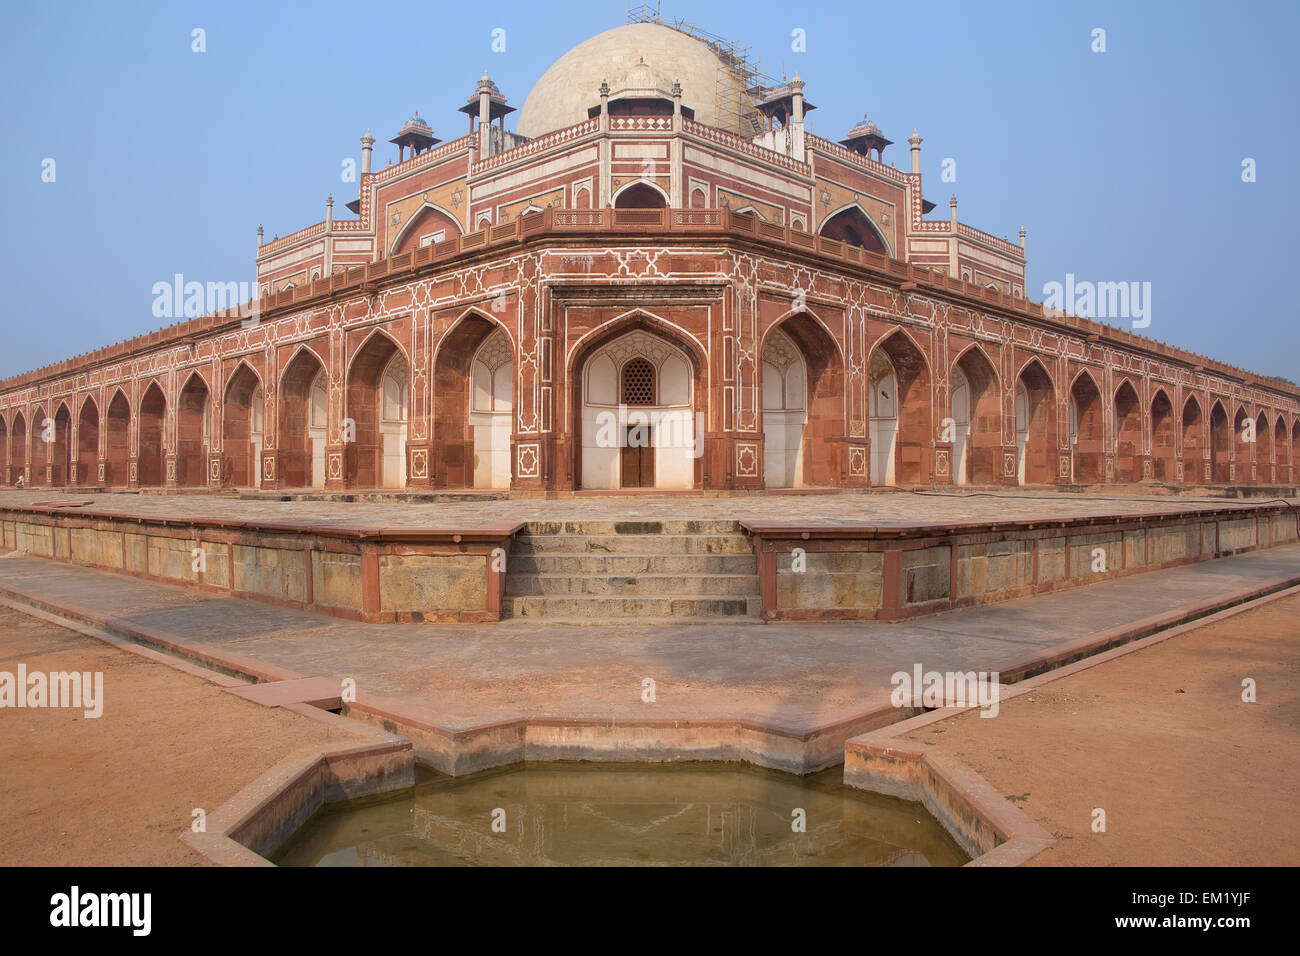 Humayun's Tomb in Delhi, India. It was the first garden-tomb on the Indian subcontinent. Stock Photo